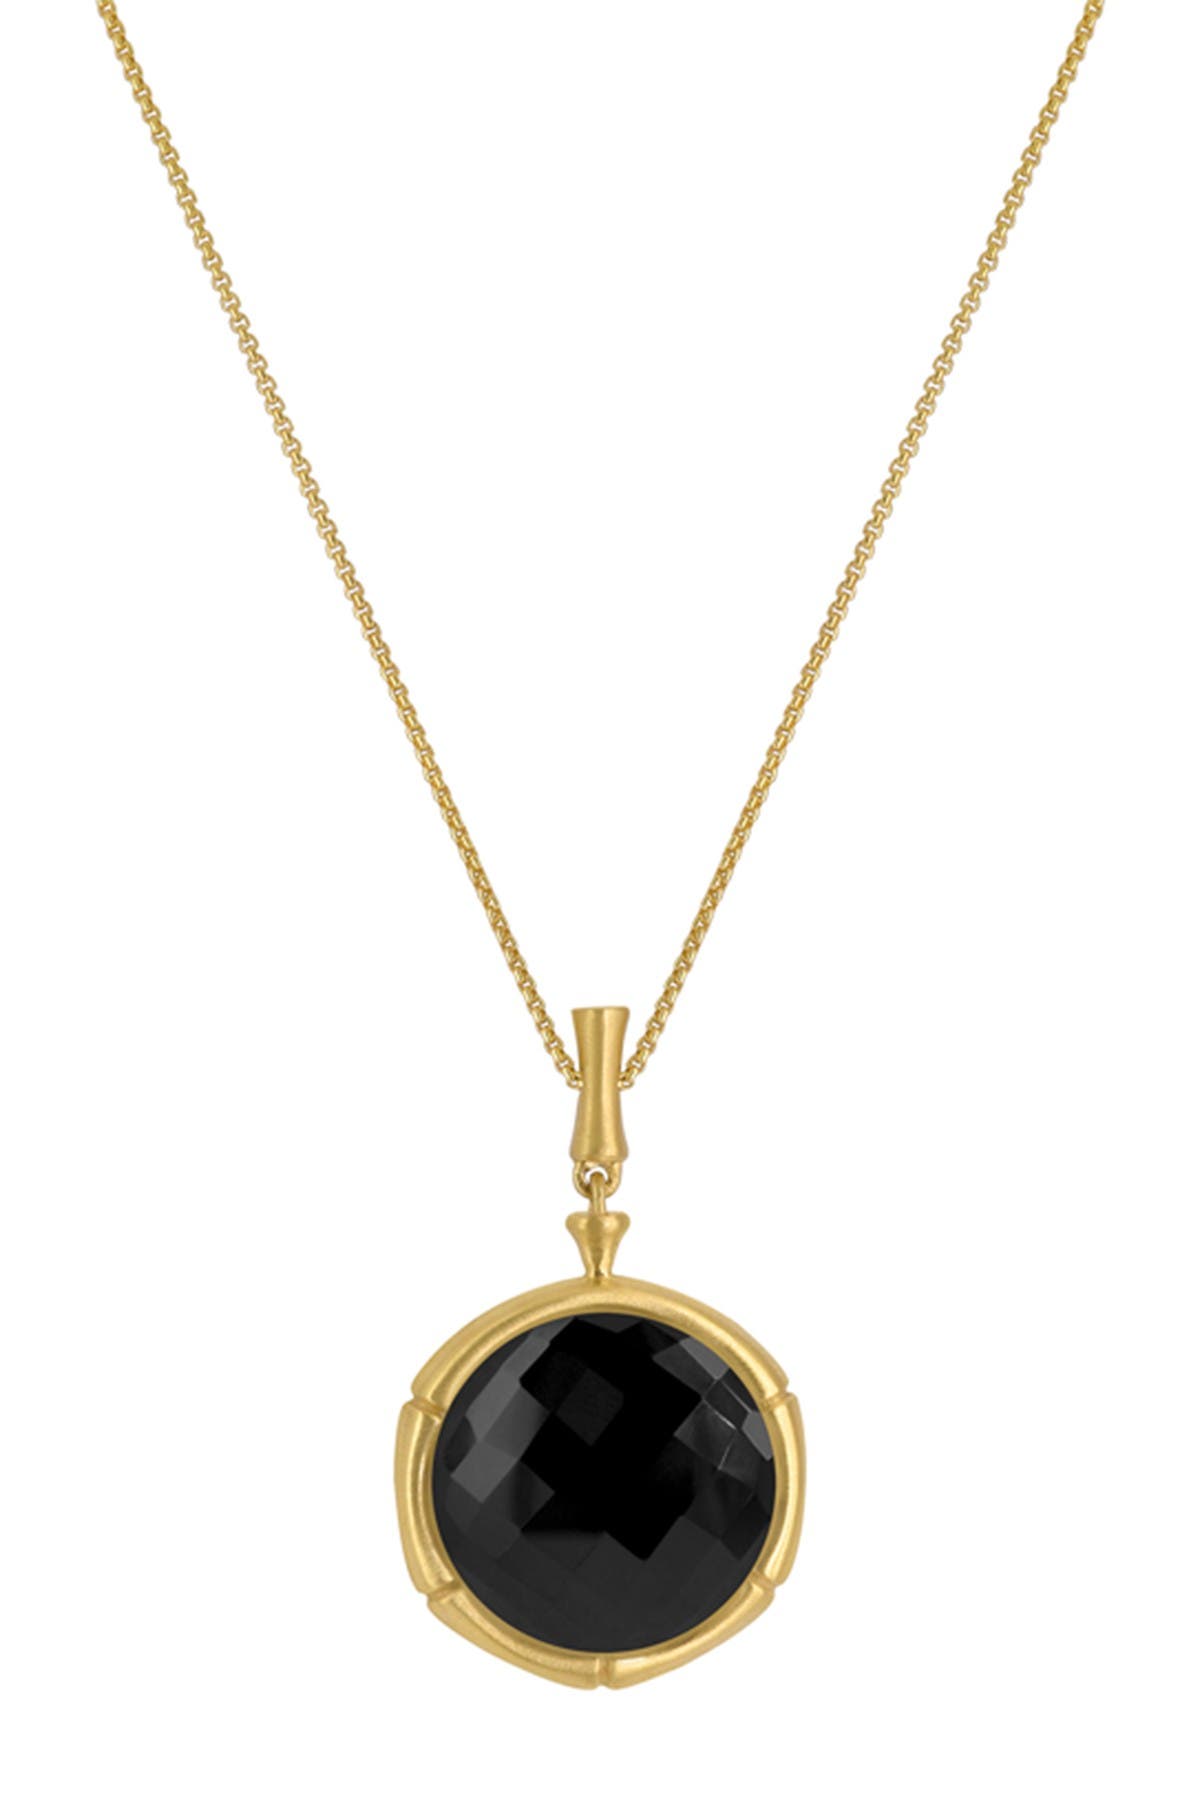 Dean Davidson 22k Gold Plated Bamboo Gemstone Pendant Necklace In Black Onyx